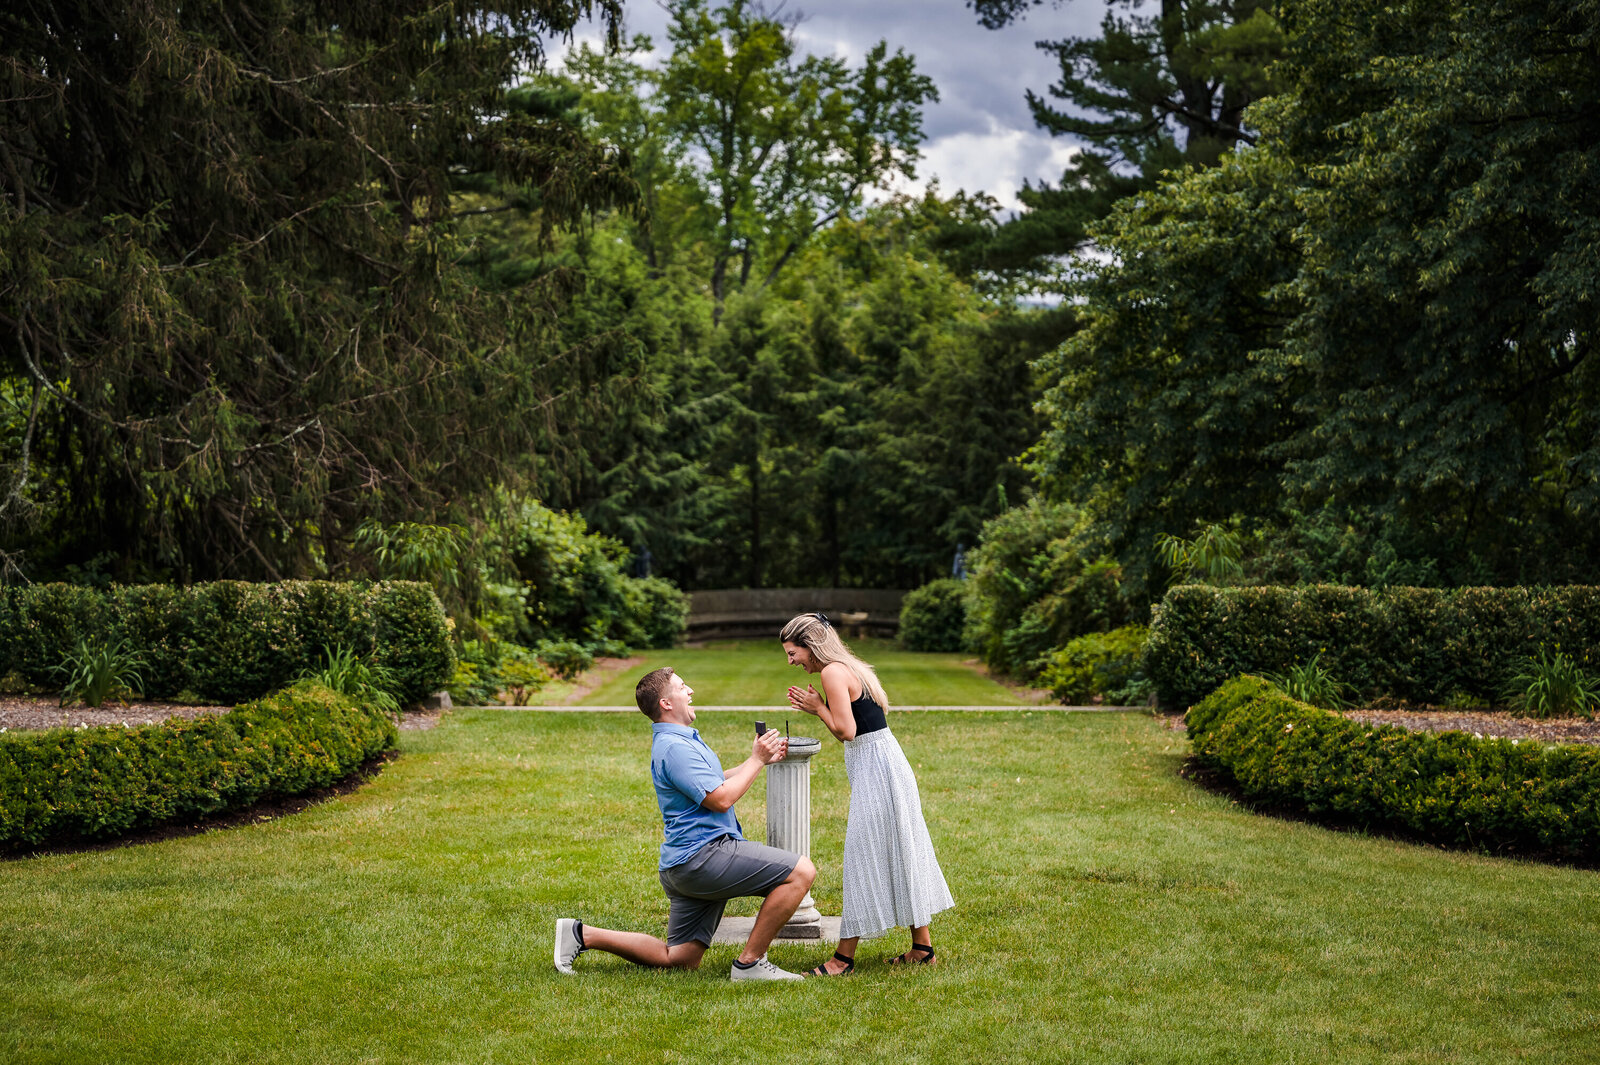 Looking for a proposal photographer in NJ/NYC? Contact Ishan Fotografi for more information.